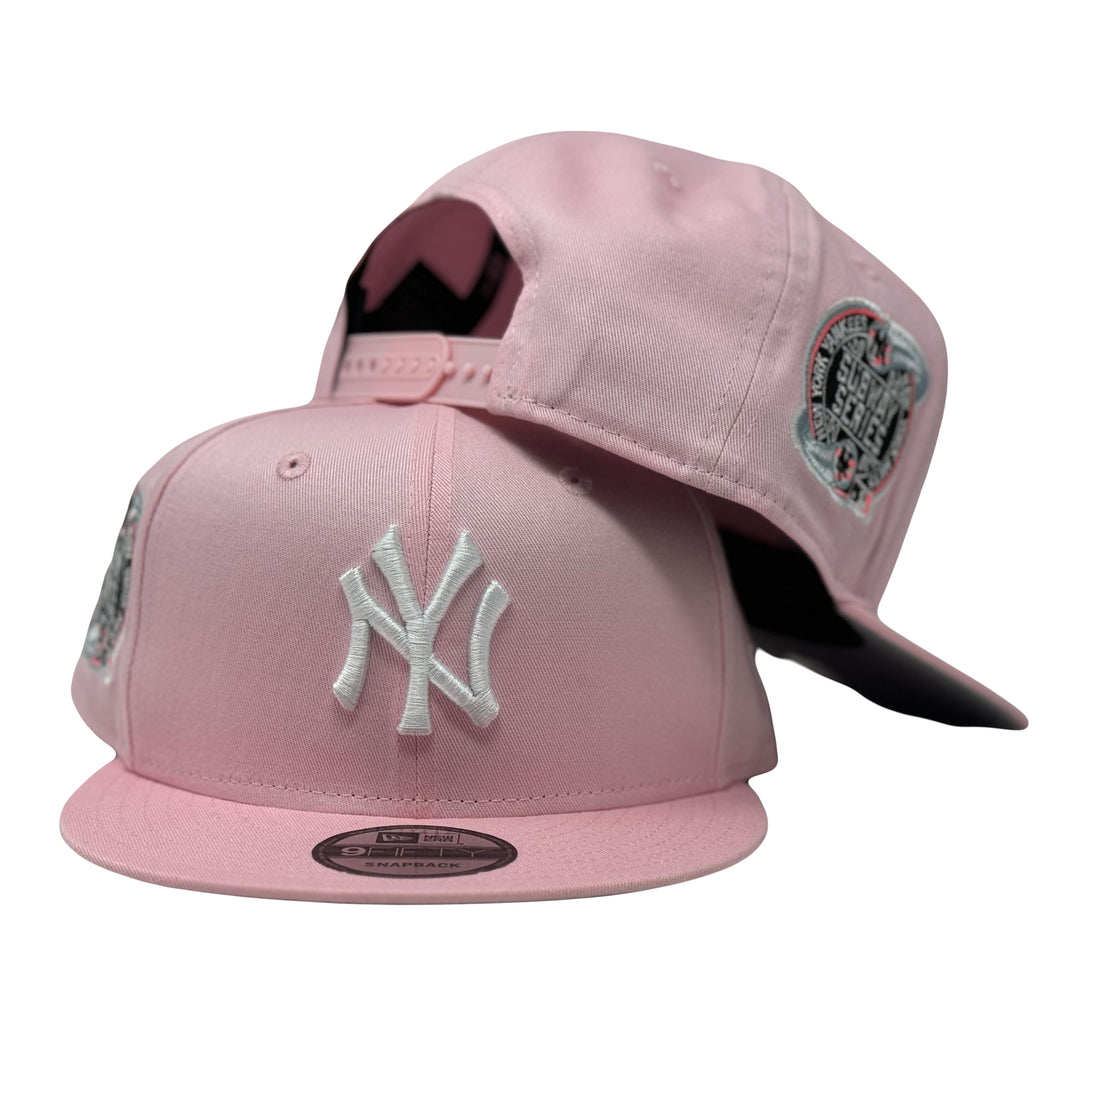 New York Yankees Subway Series Light Pink 9Fifty New Era Fitted Hat